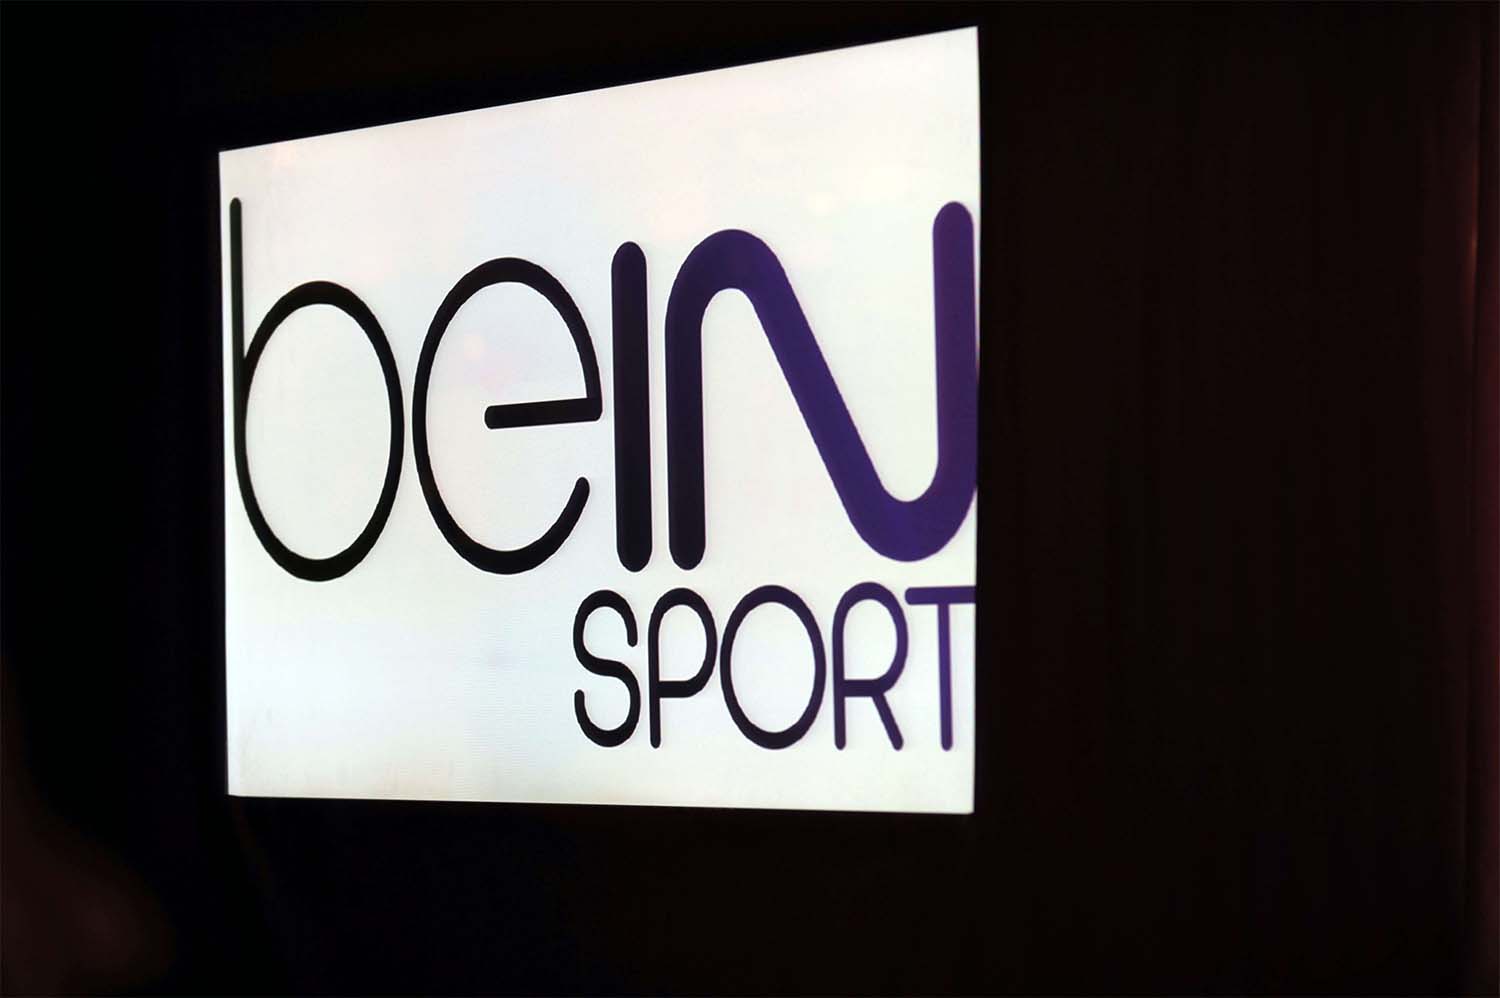 Subscribing to beIN has been difficult for Saudi fans since the kingdom's 2017 boycott of Qatar